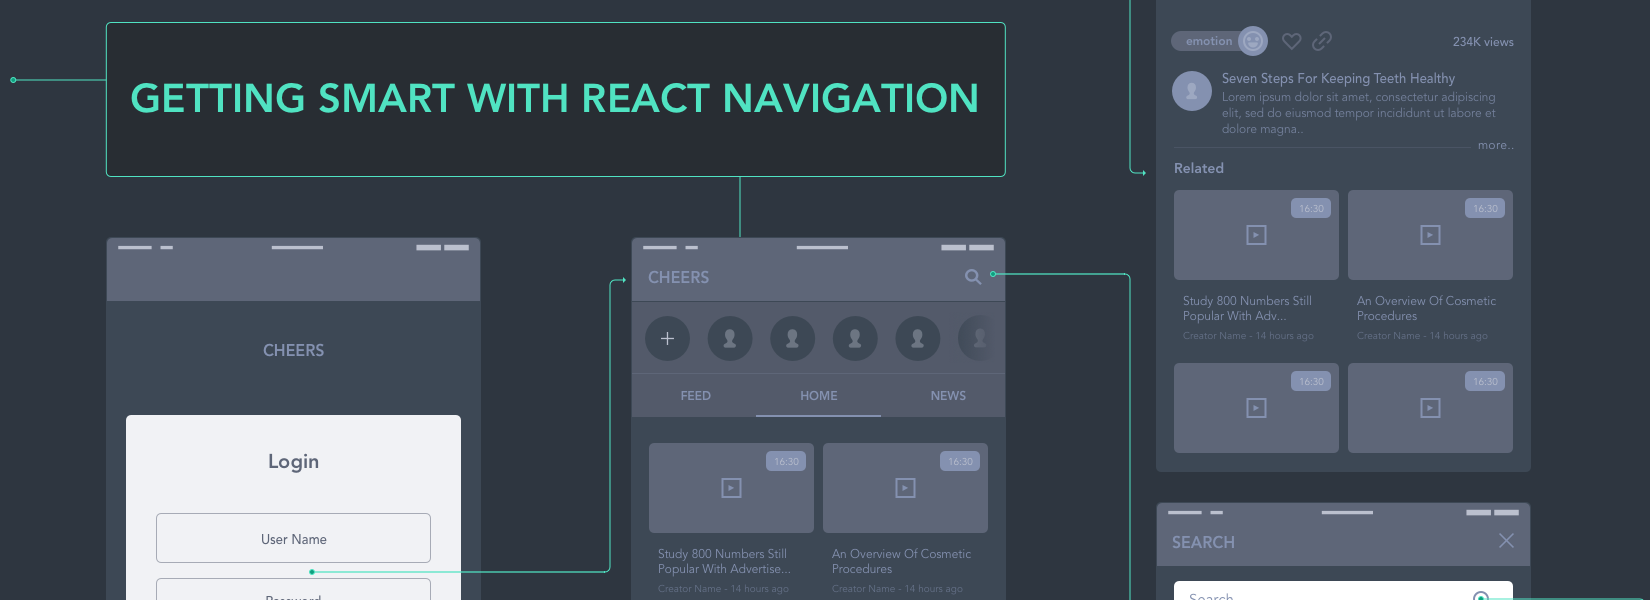 Getting smart with React Navigation